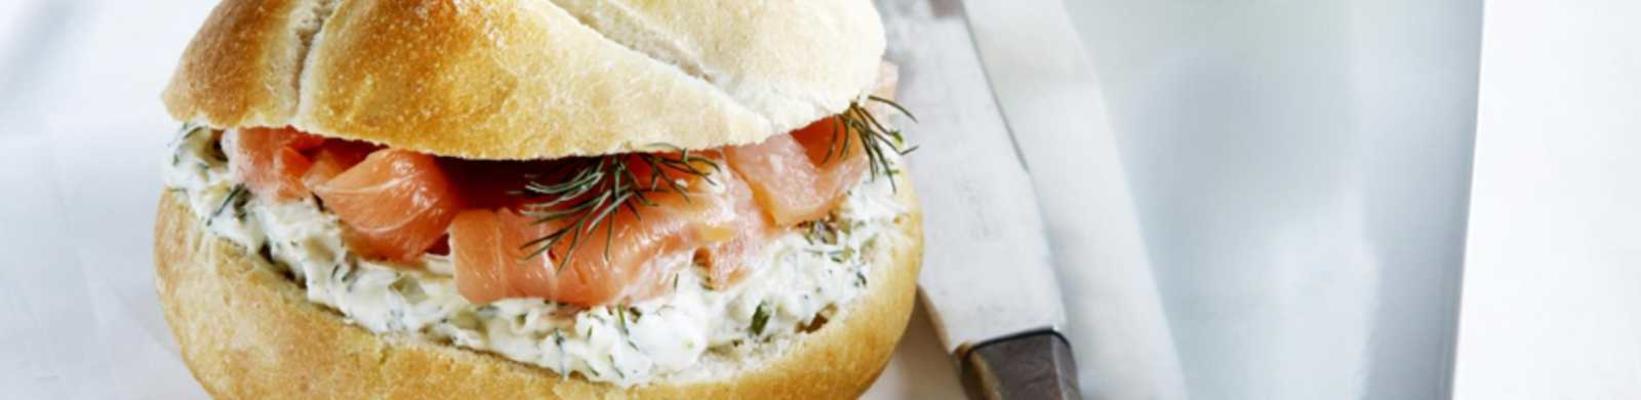 kaiser roll with dillemascarpone and smoked salmon